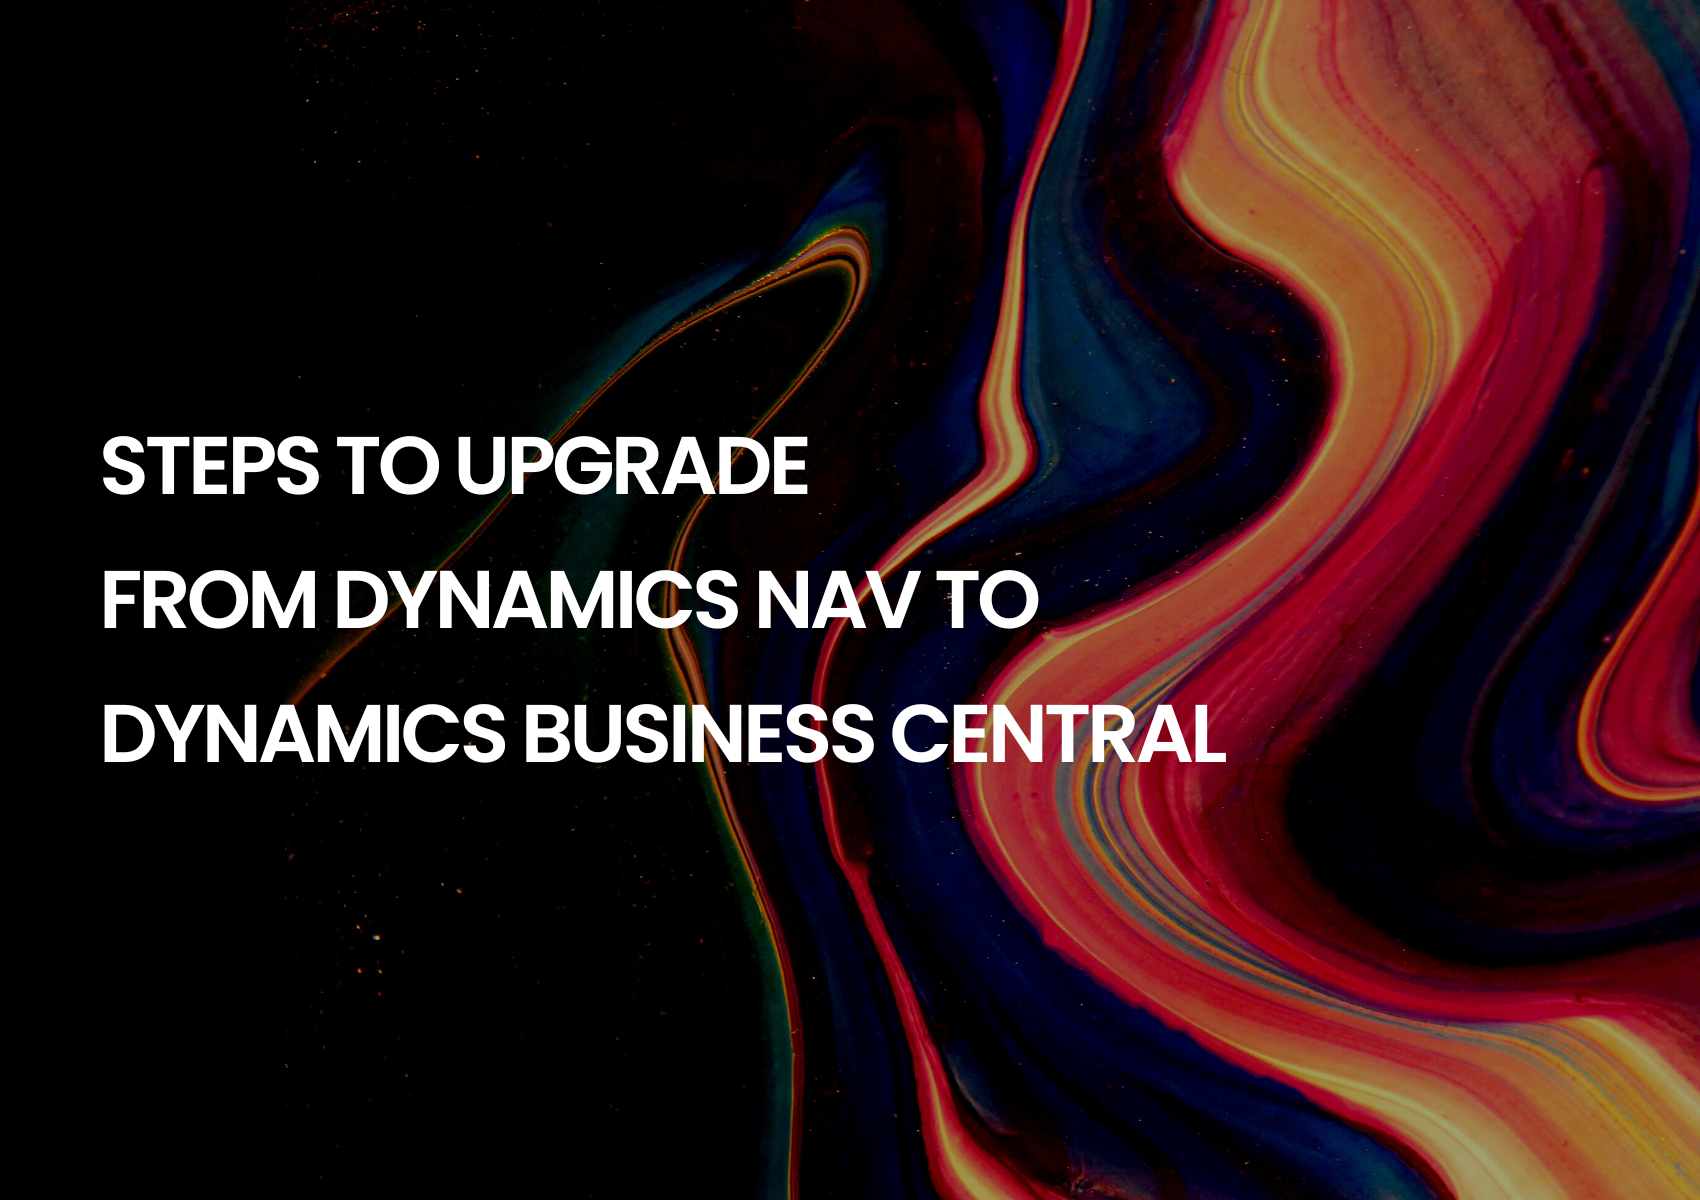 Steps to upgrade Dynamics NAV to Business Central